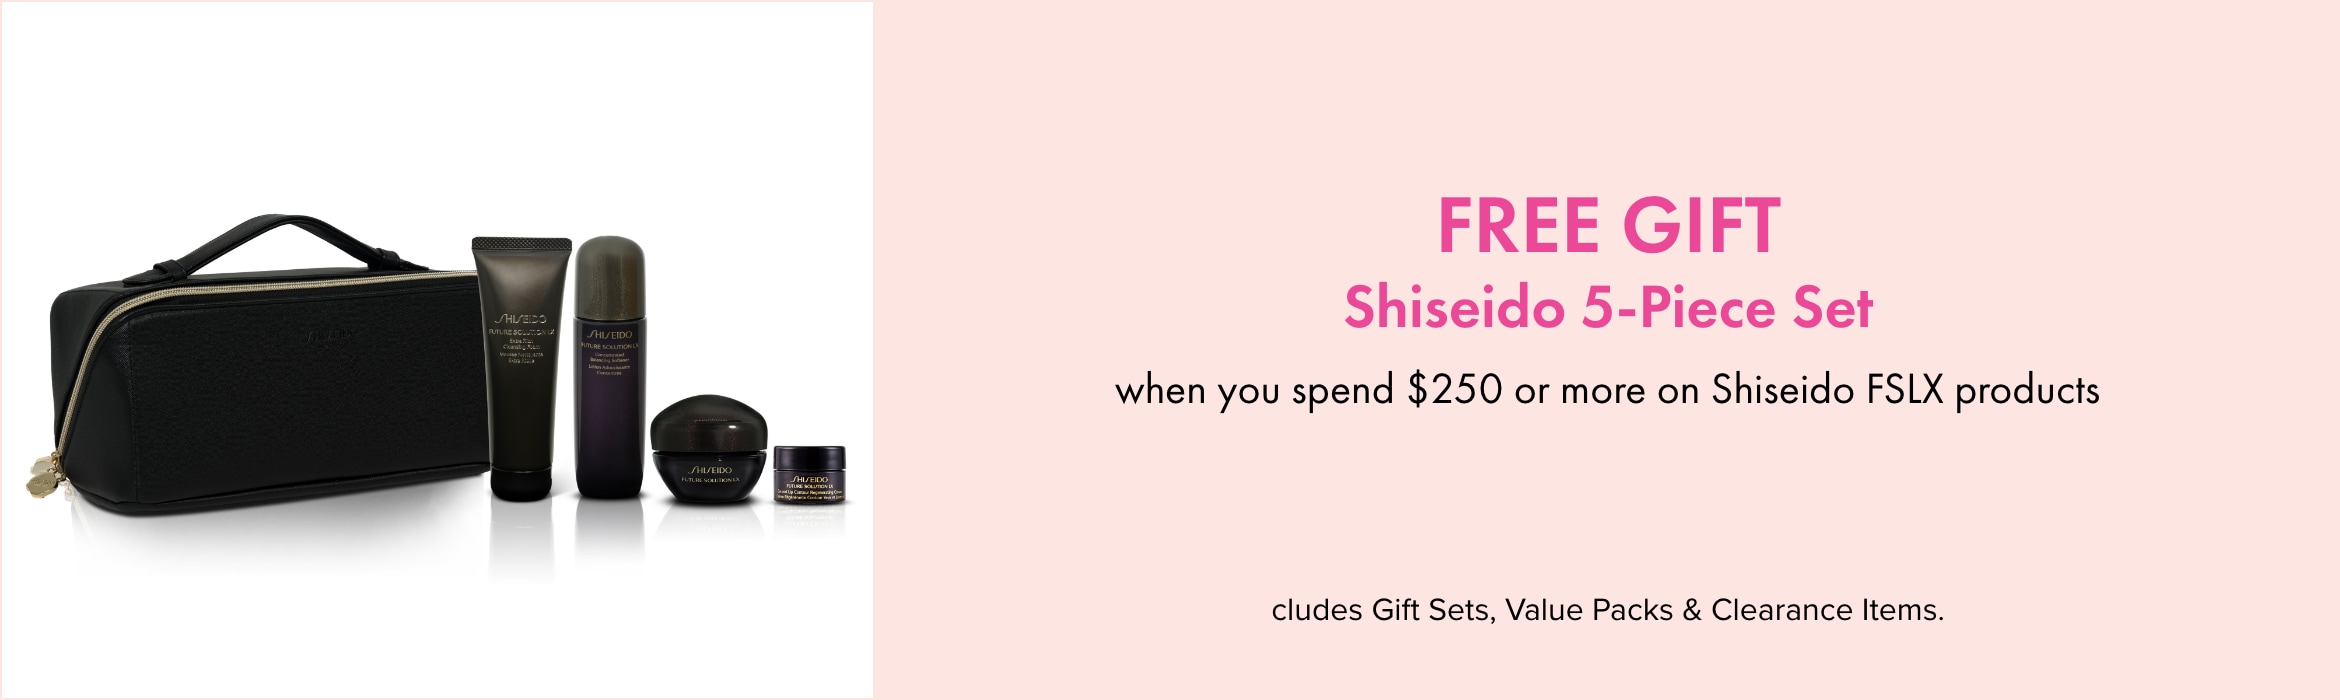 Shiseido 5-Piece Set when you spend $250 or more on Shiseido FSLX products